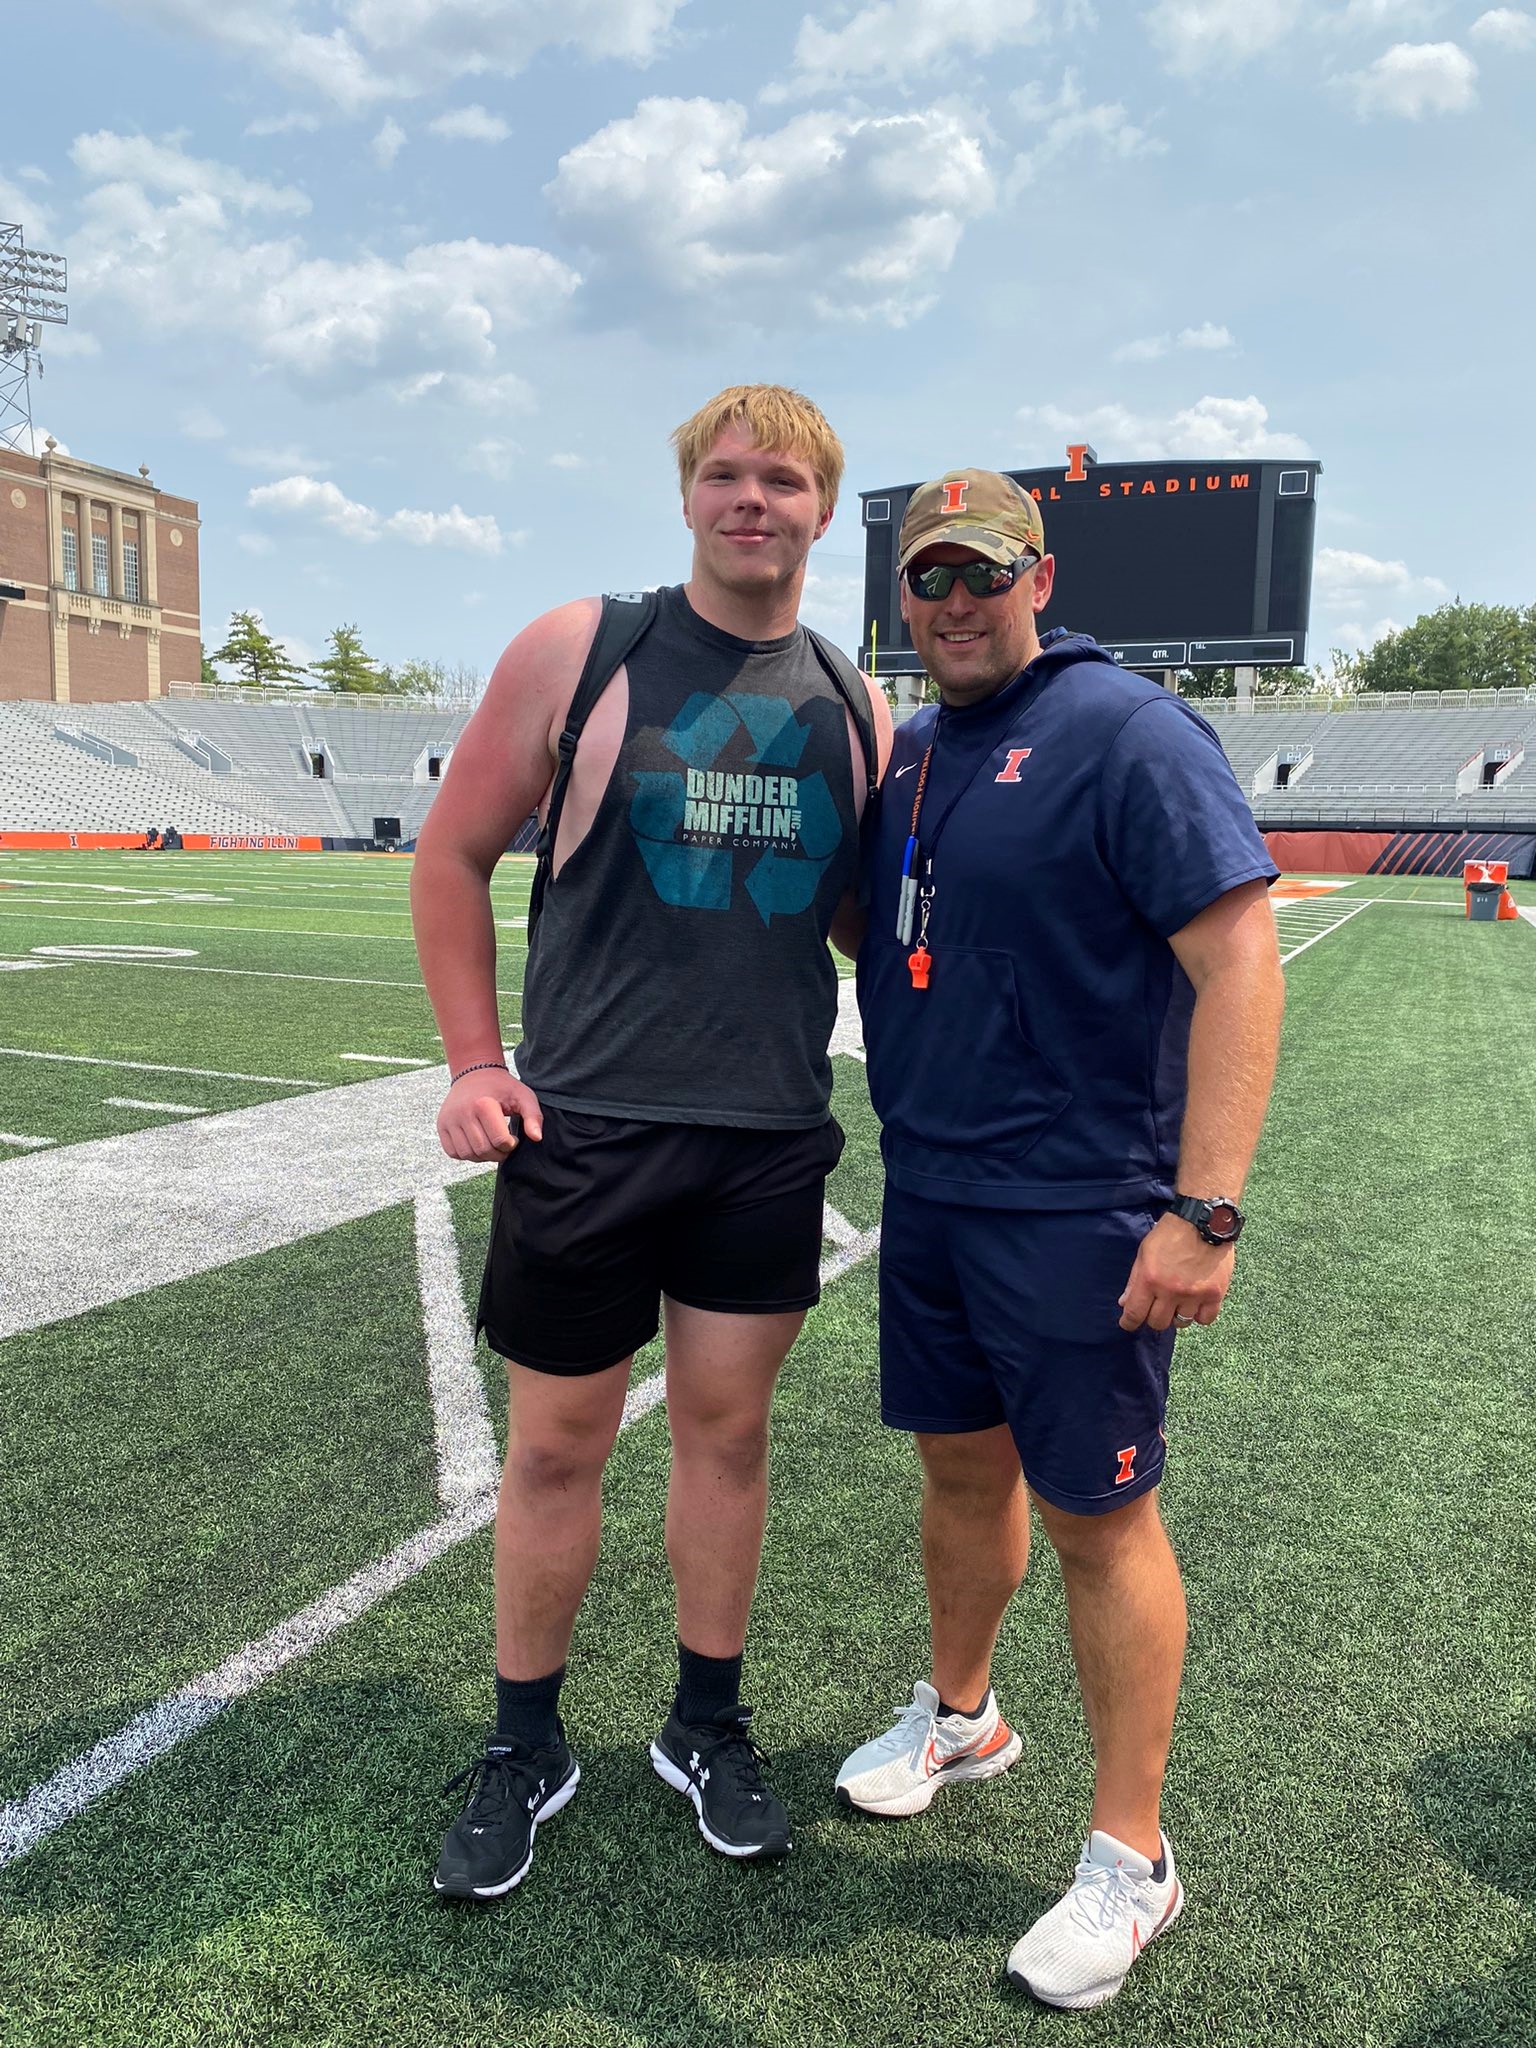 The Farrell Files Illinois - OL Commit & Possible Upcoming Commitment